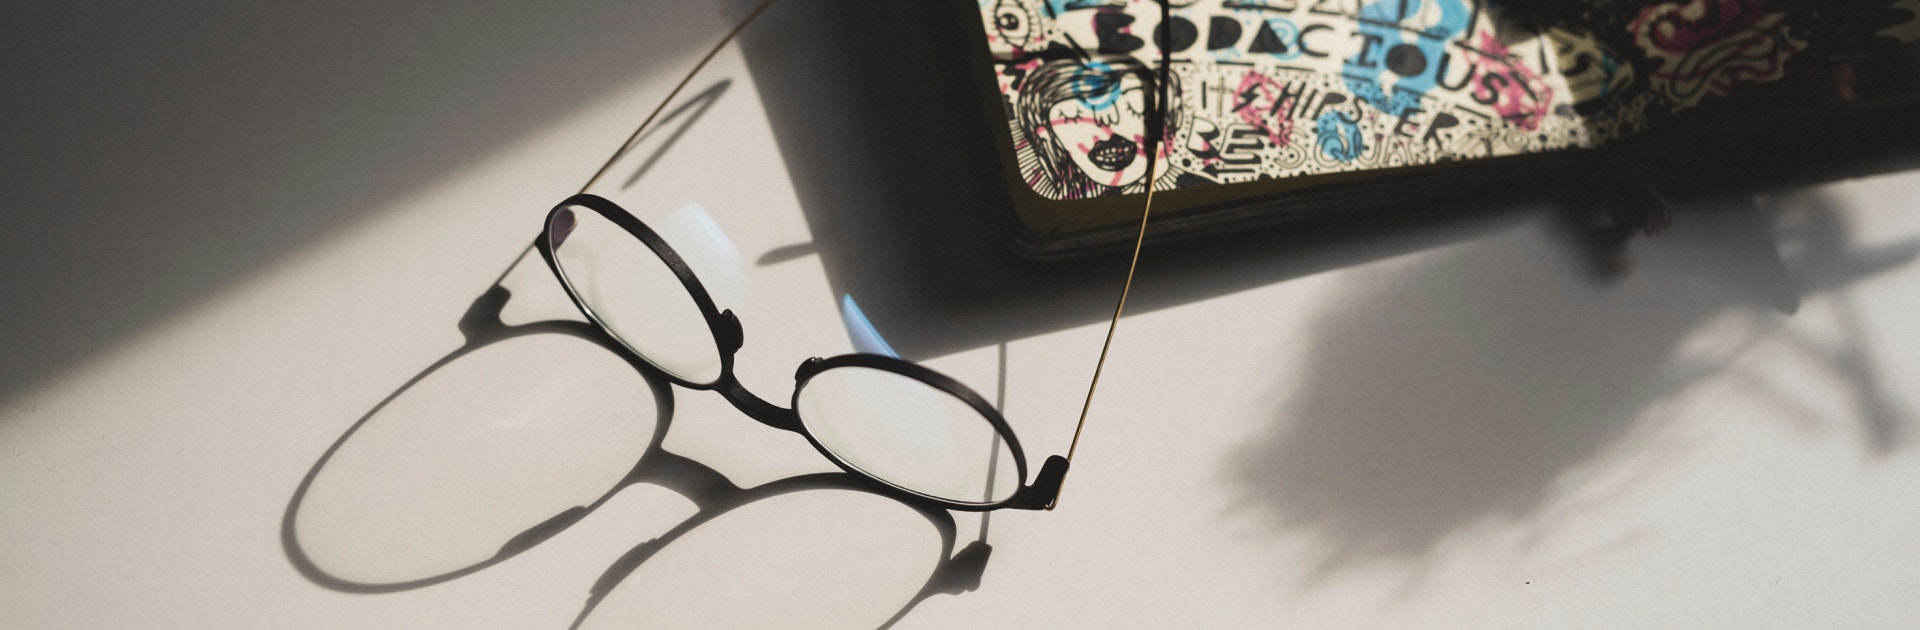 Eyeglasses laying on a design with its shadow extended